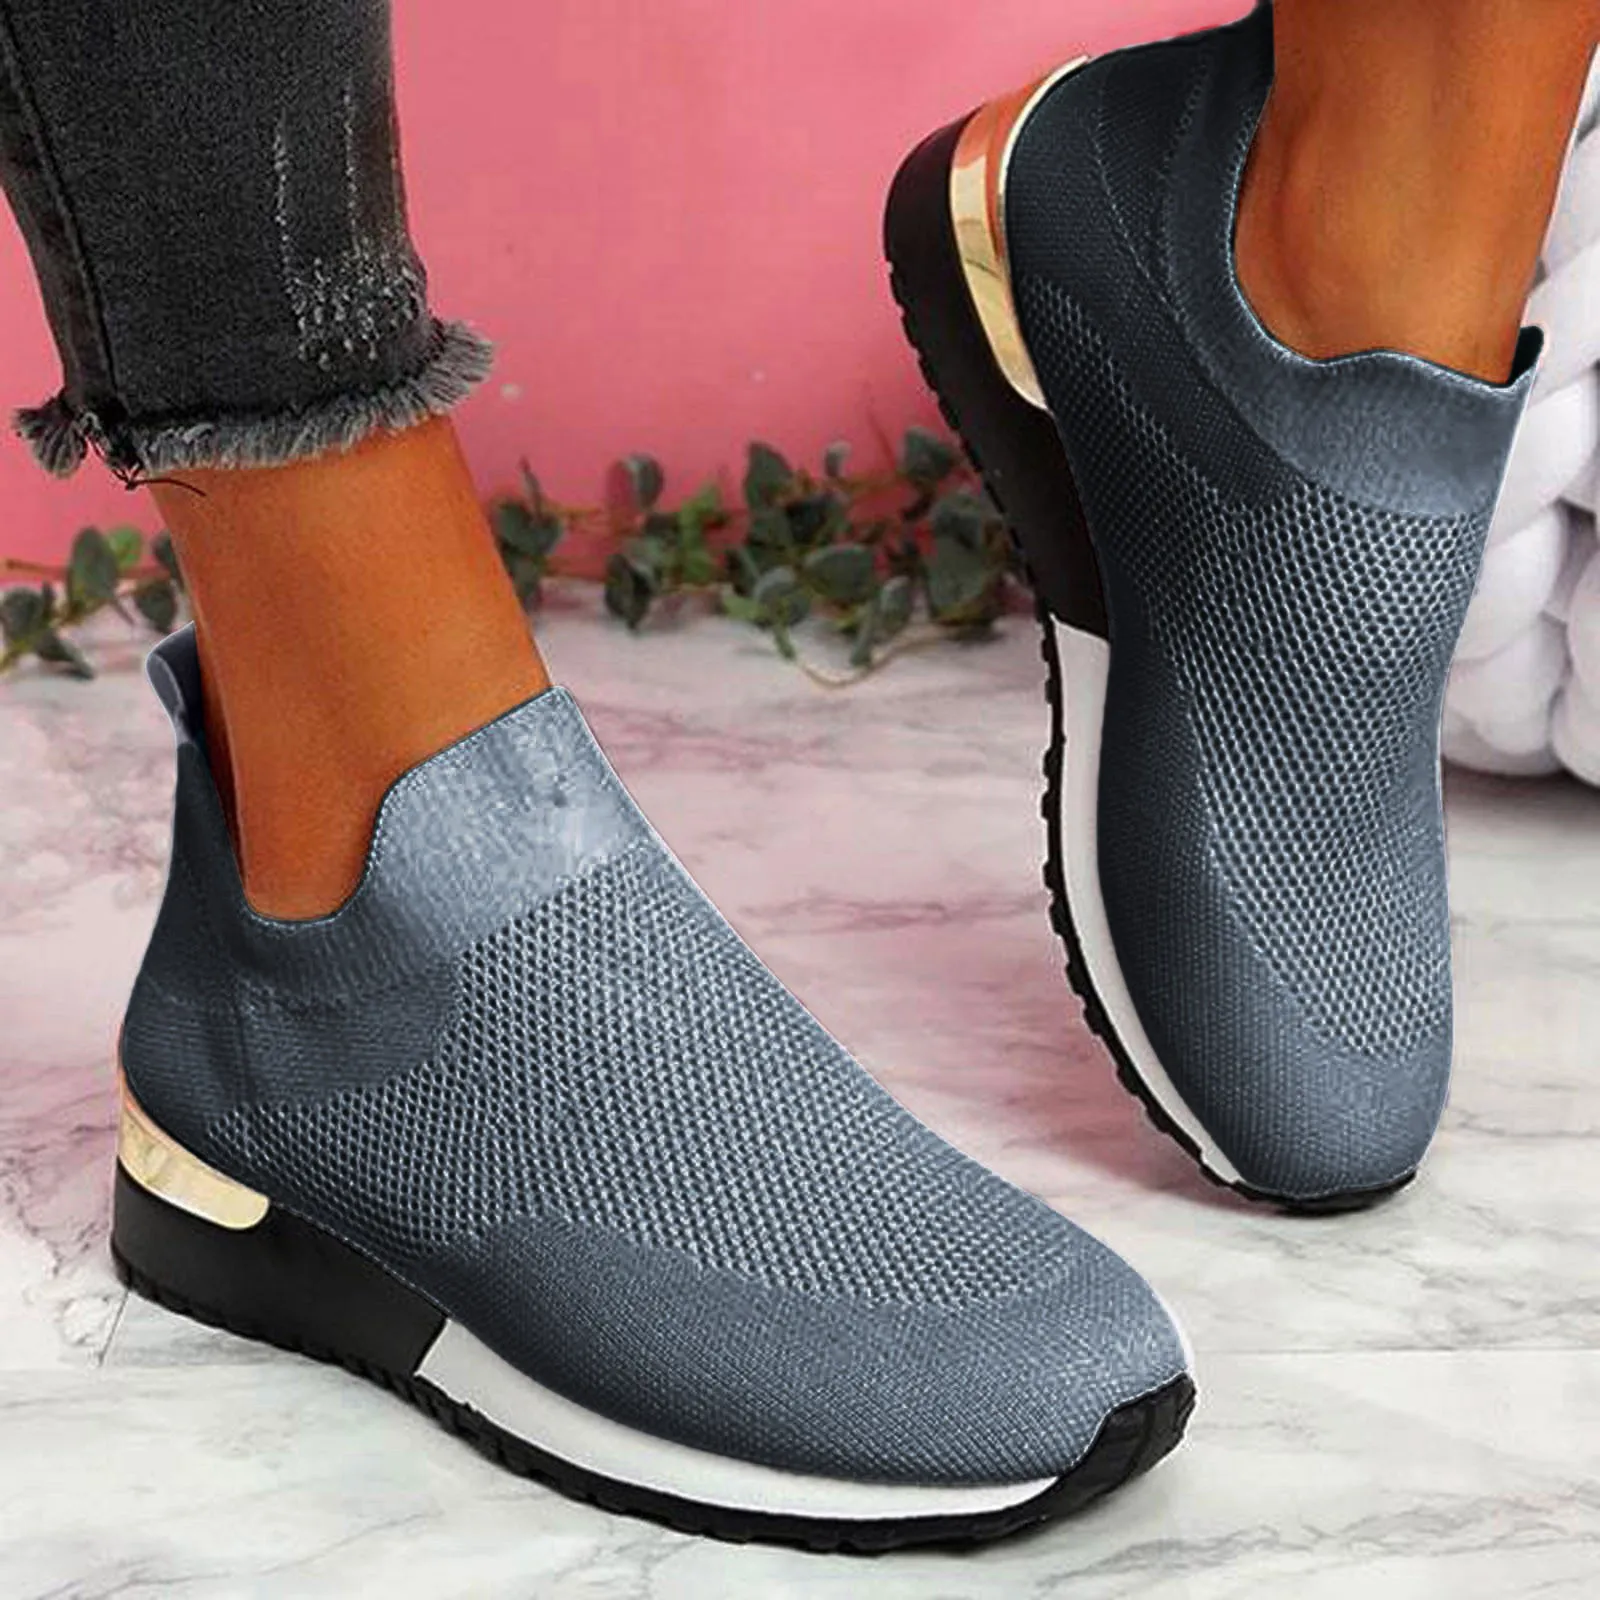 Shoes Women Outdoor  Solid Color  Shoes Runing  Shoes   shoes for women - £115.72 GBP